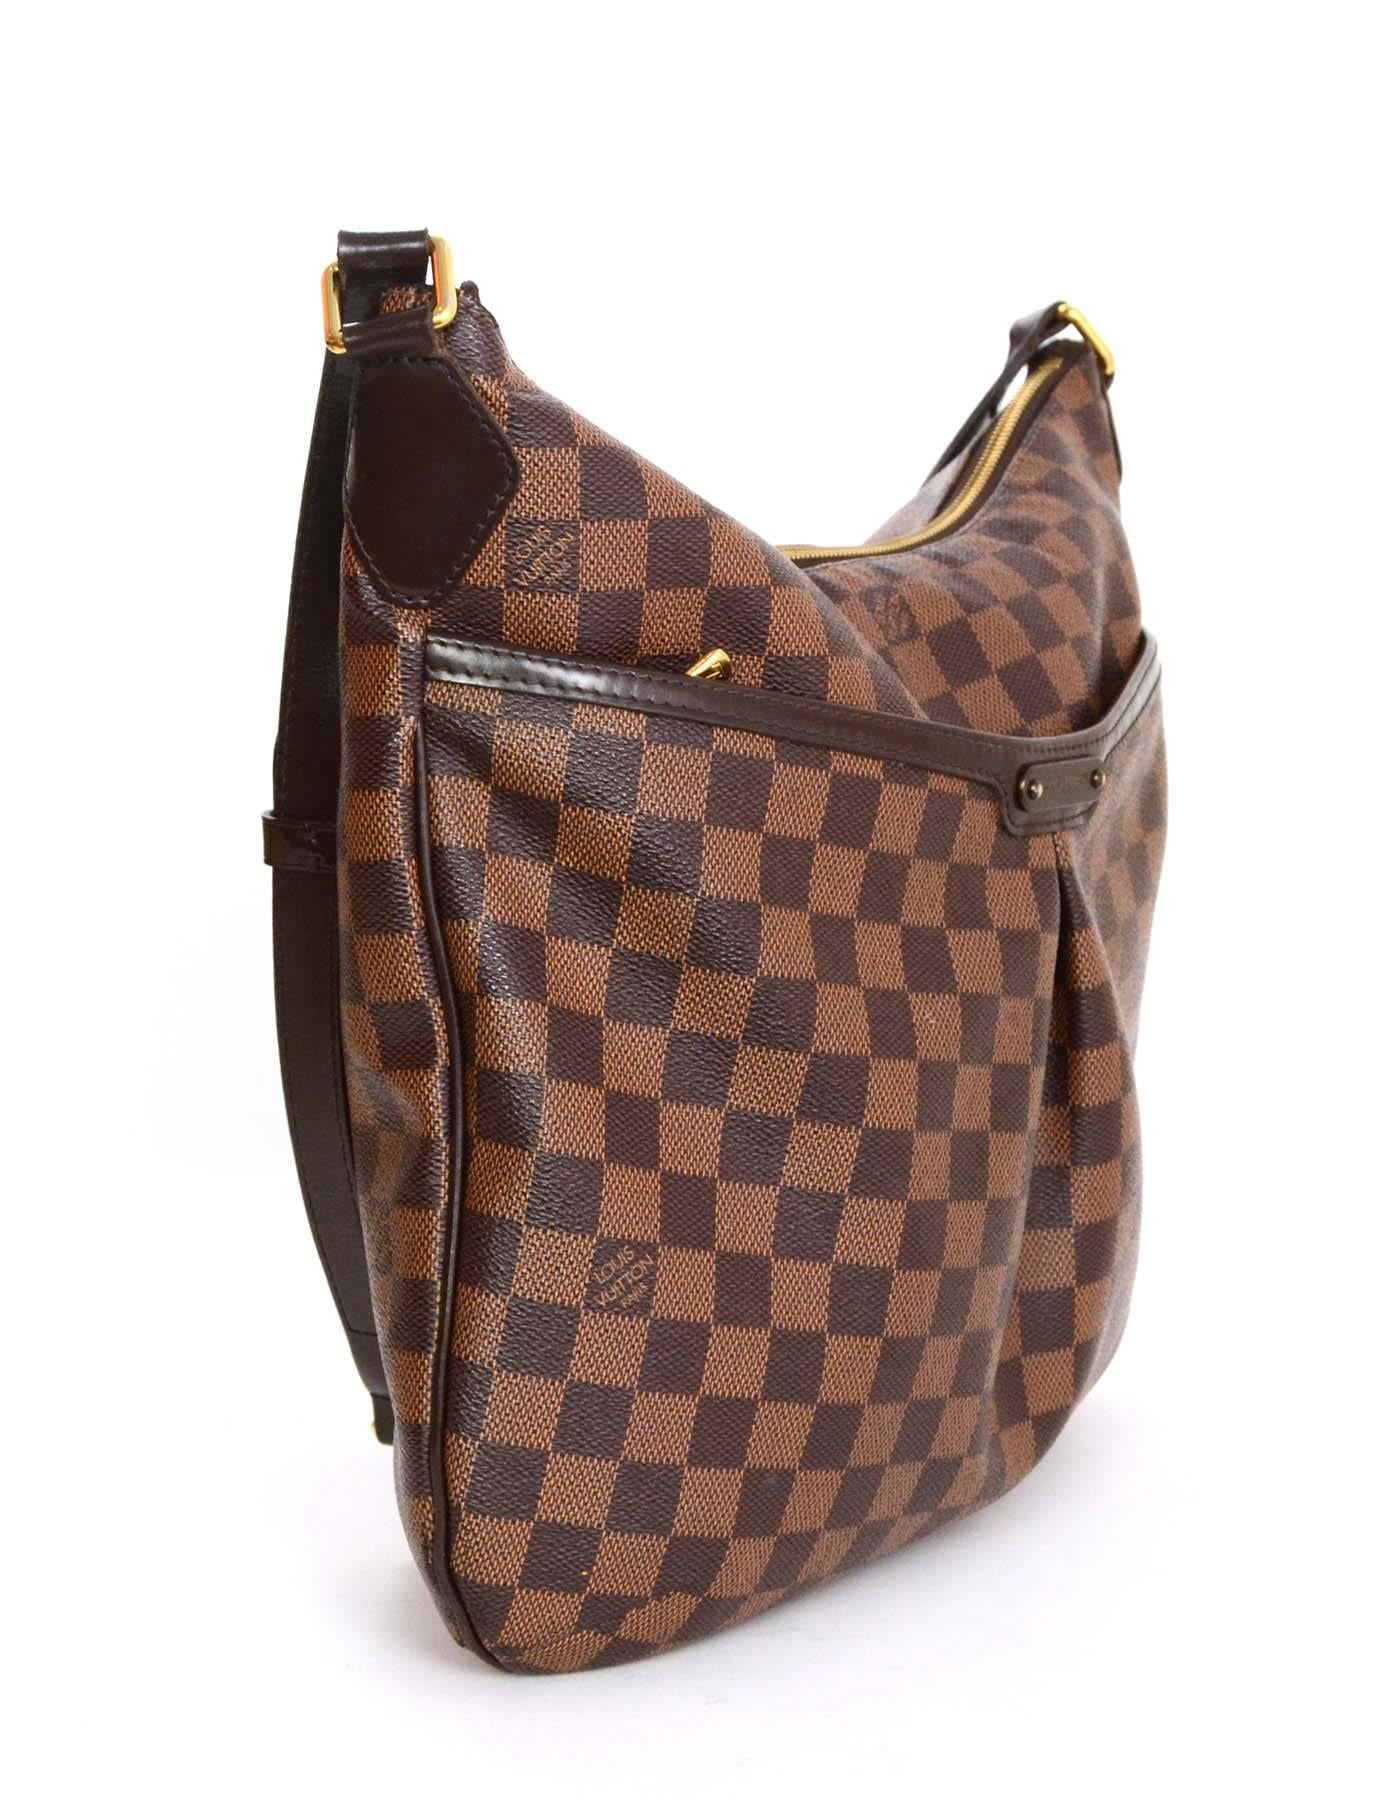 Louis Vuitton Damier Bloomsbury GM Crossbody

Features adjustable shoulder strap and front pleat detail. This size is no longer produced by Louis Vuitton

    Made In: France
    Year of Production: 2011
    Color: Brown
    Hardware: